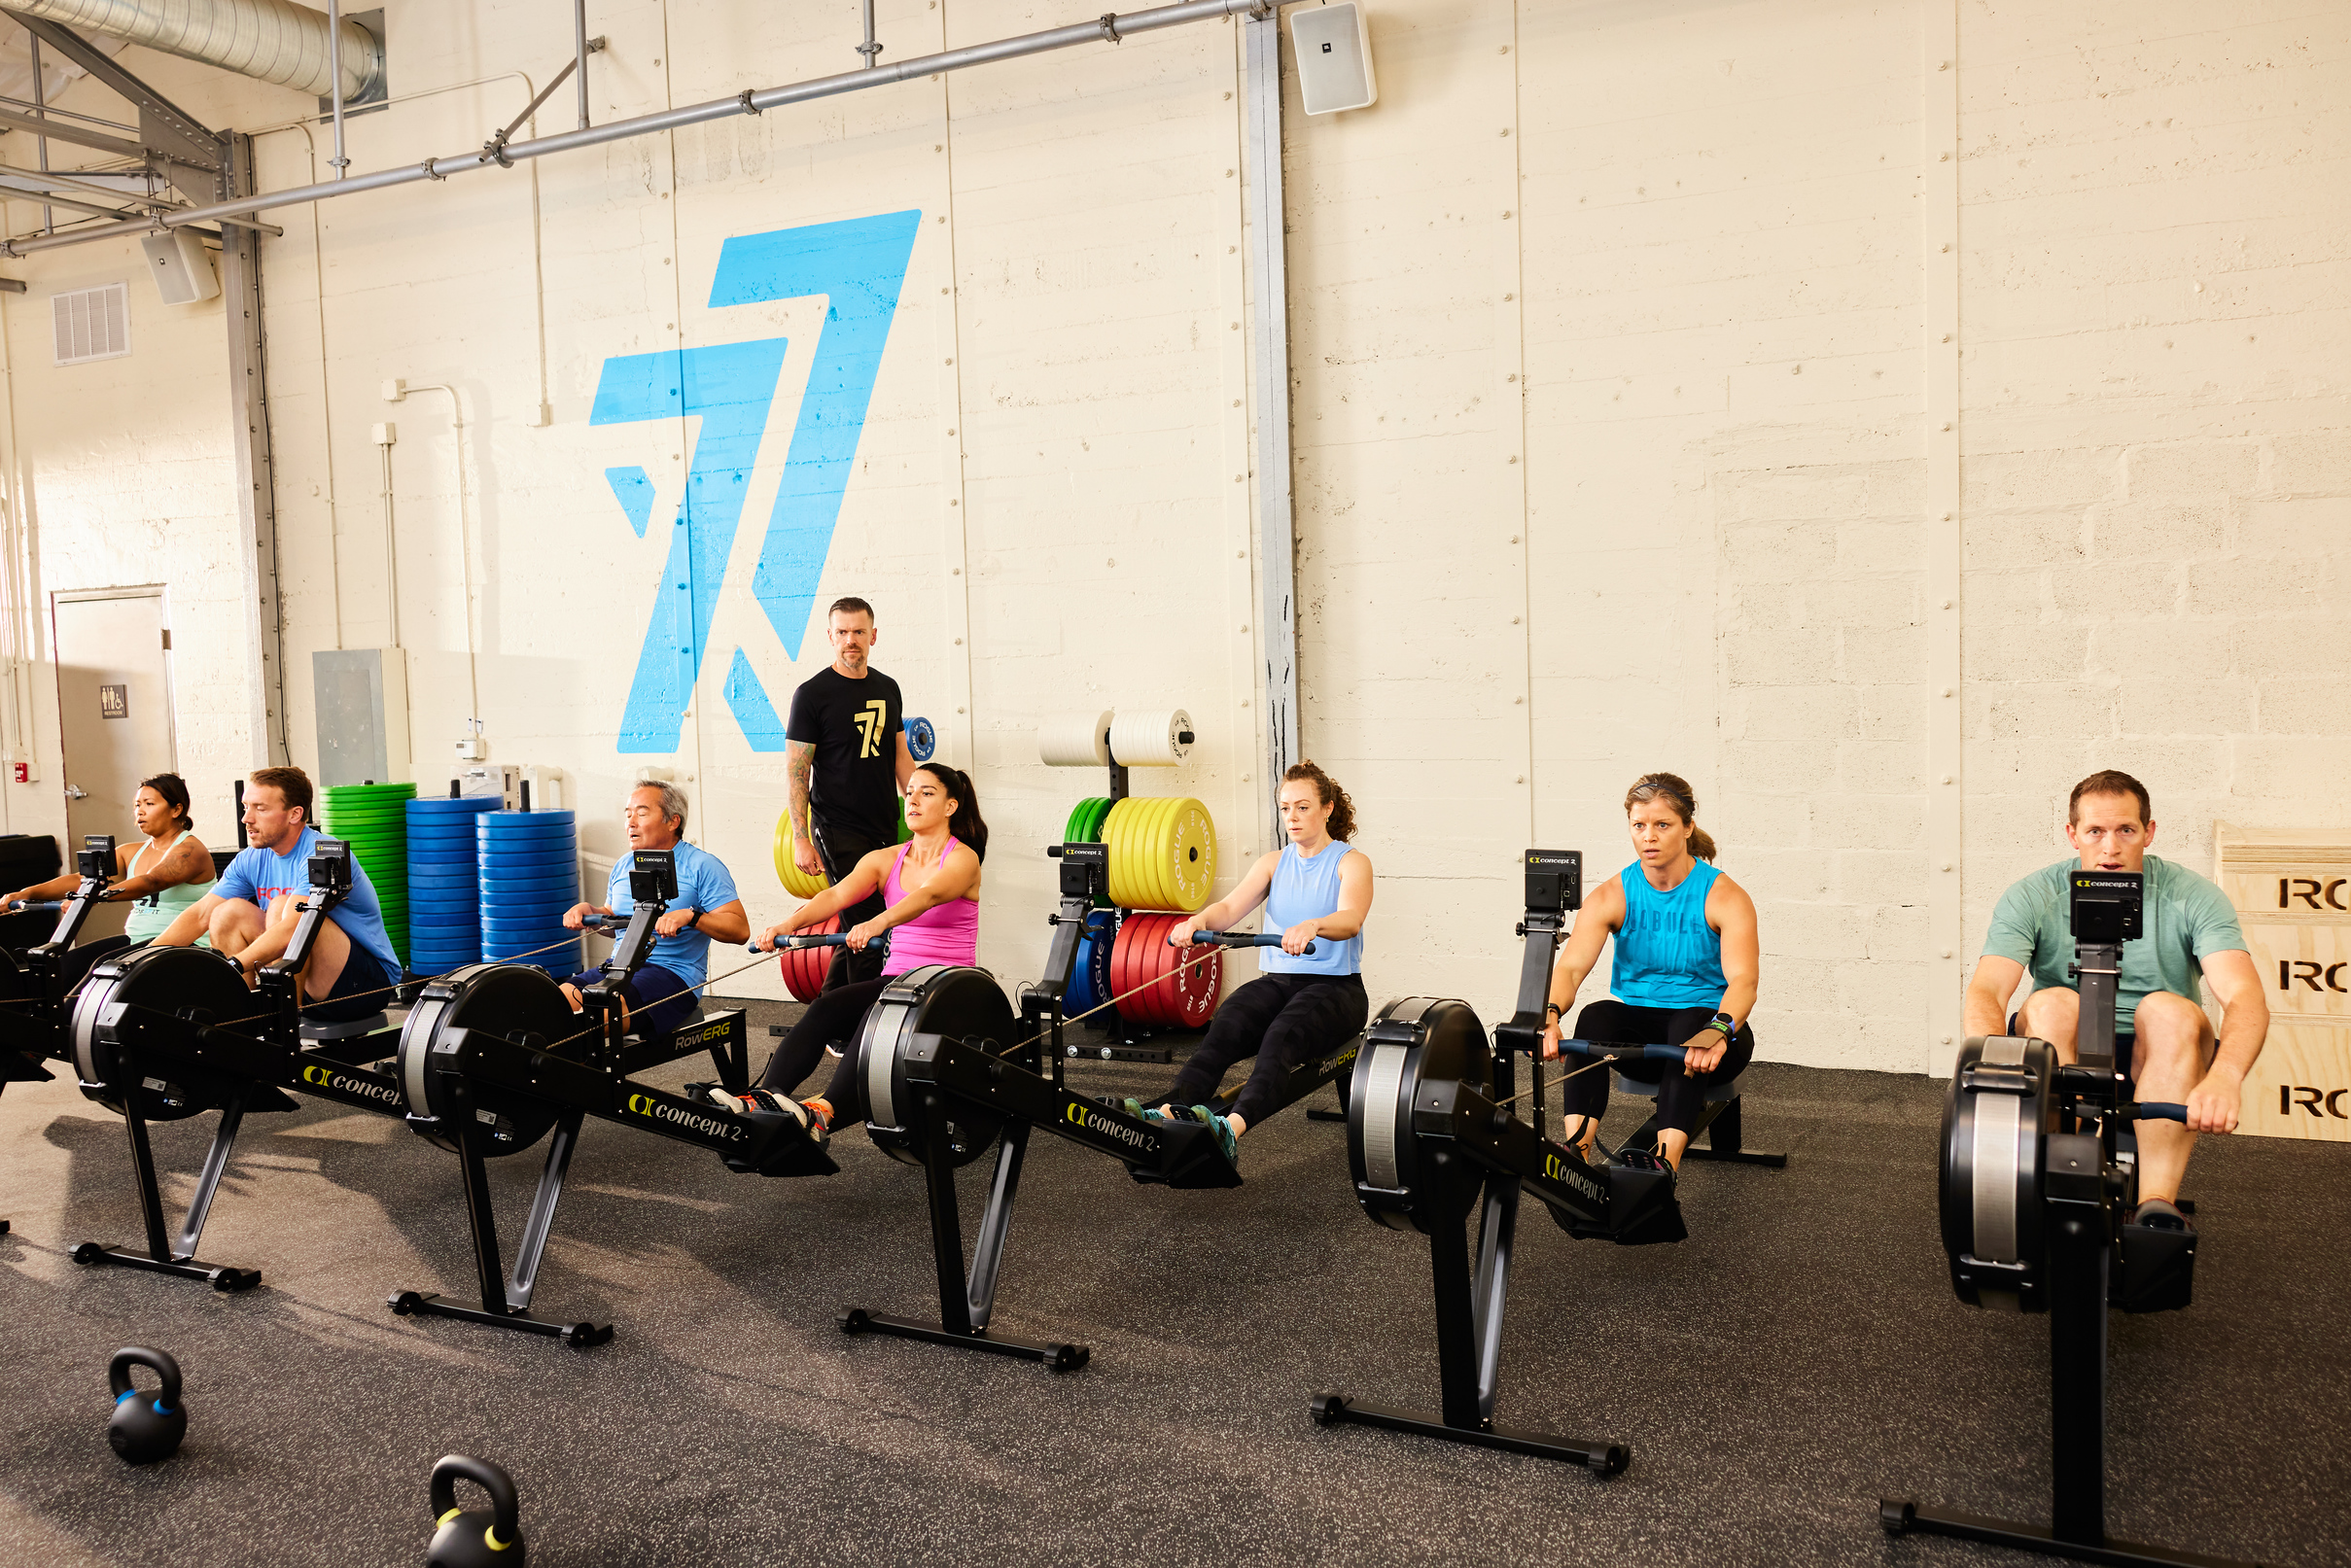 Group of people working out on a rowing machine in a workout room